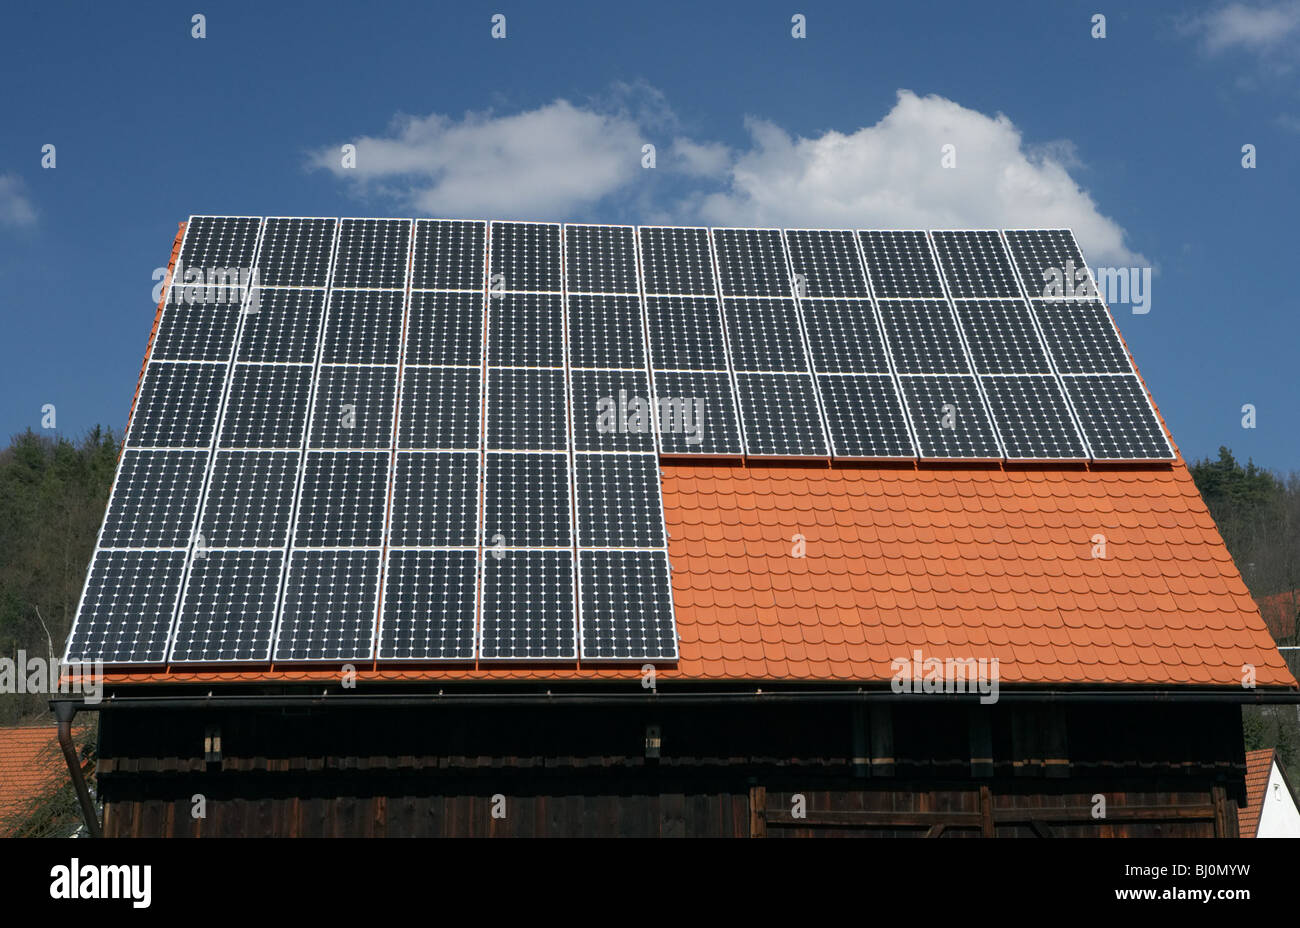 Solar cells on the roof of a farmstead, Goldkronach, Germany Stock Photo